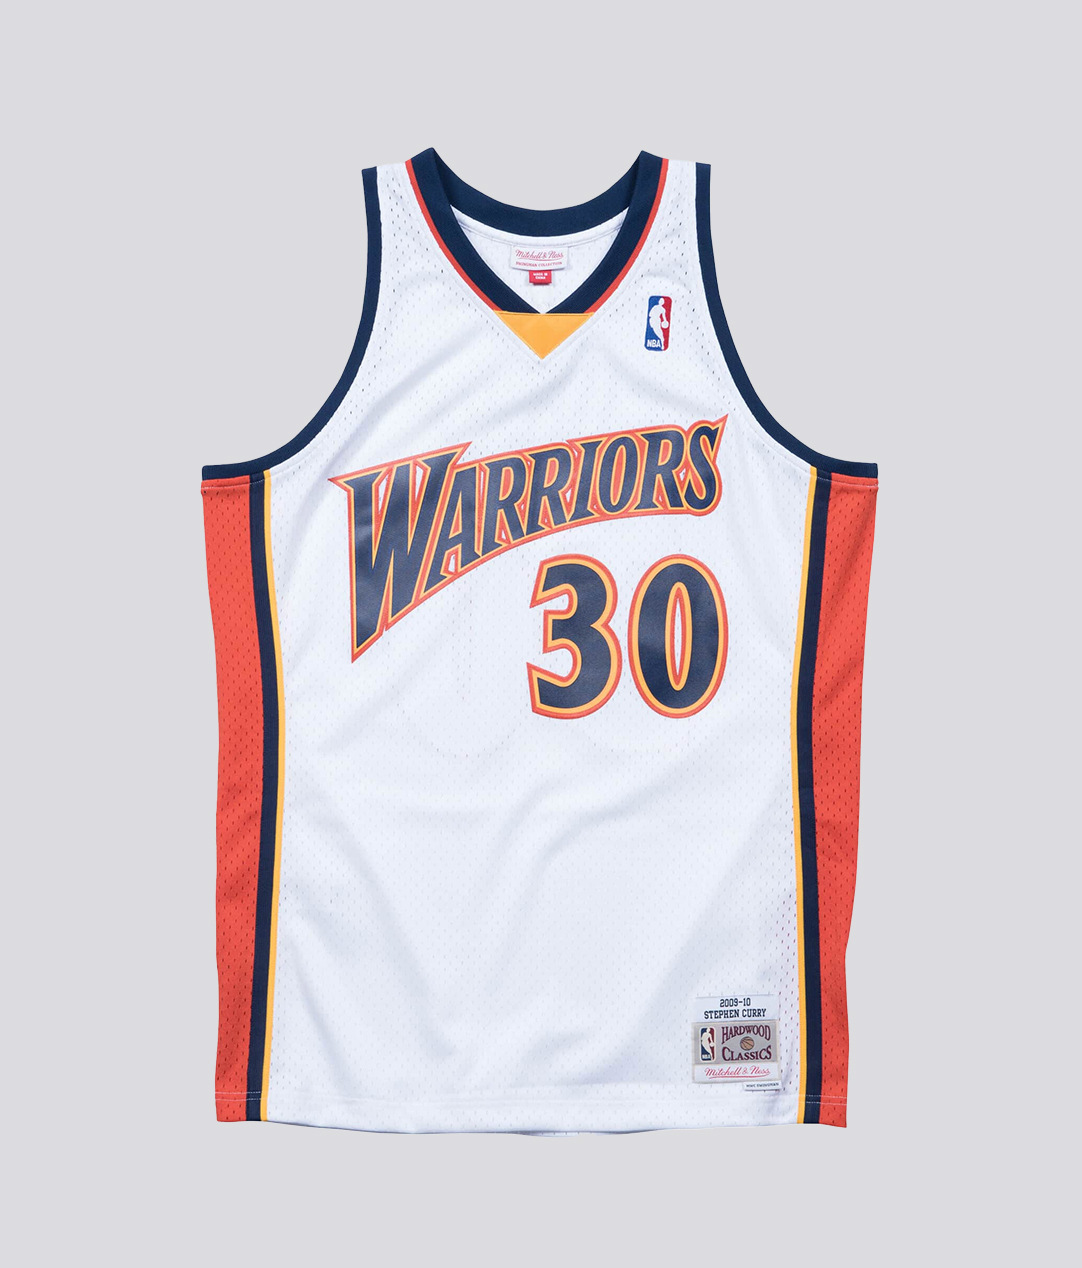 SWINGMAN JERSEY GOLDEN STATE WARRIORS HOME 2009-10 STEPHEN CURRY 'WHITE'